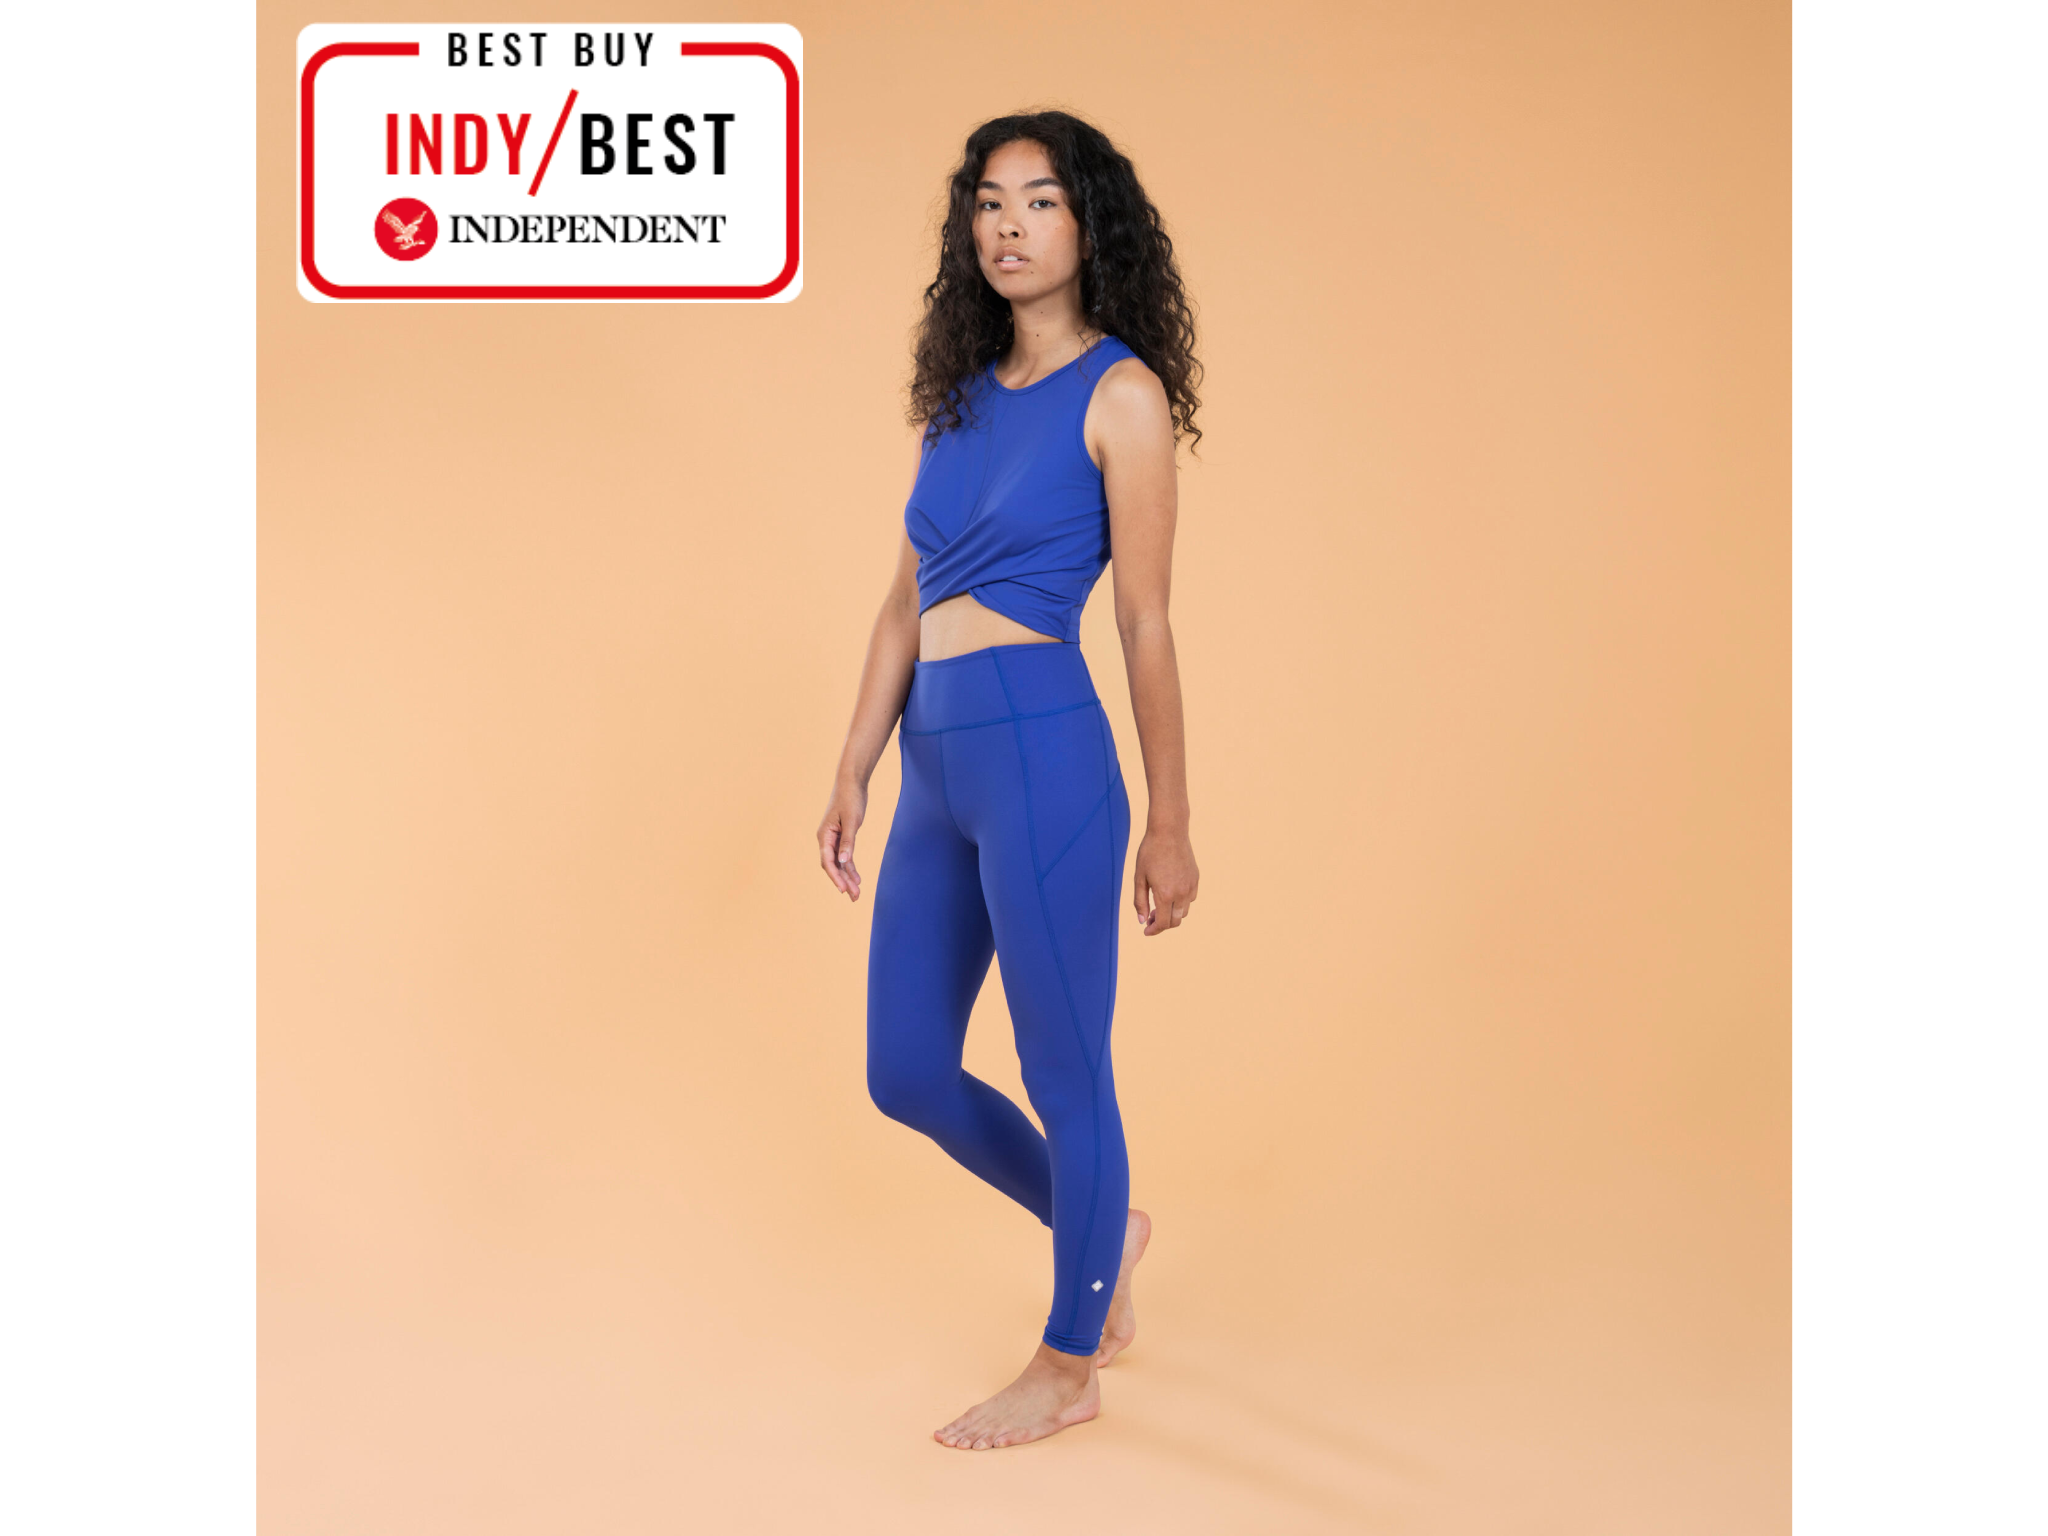 11 Best Organic Yoga Clothes for Travel or the Studio - The Yogi